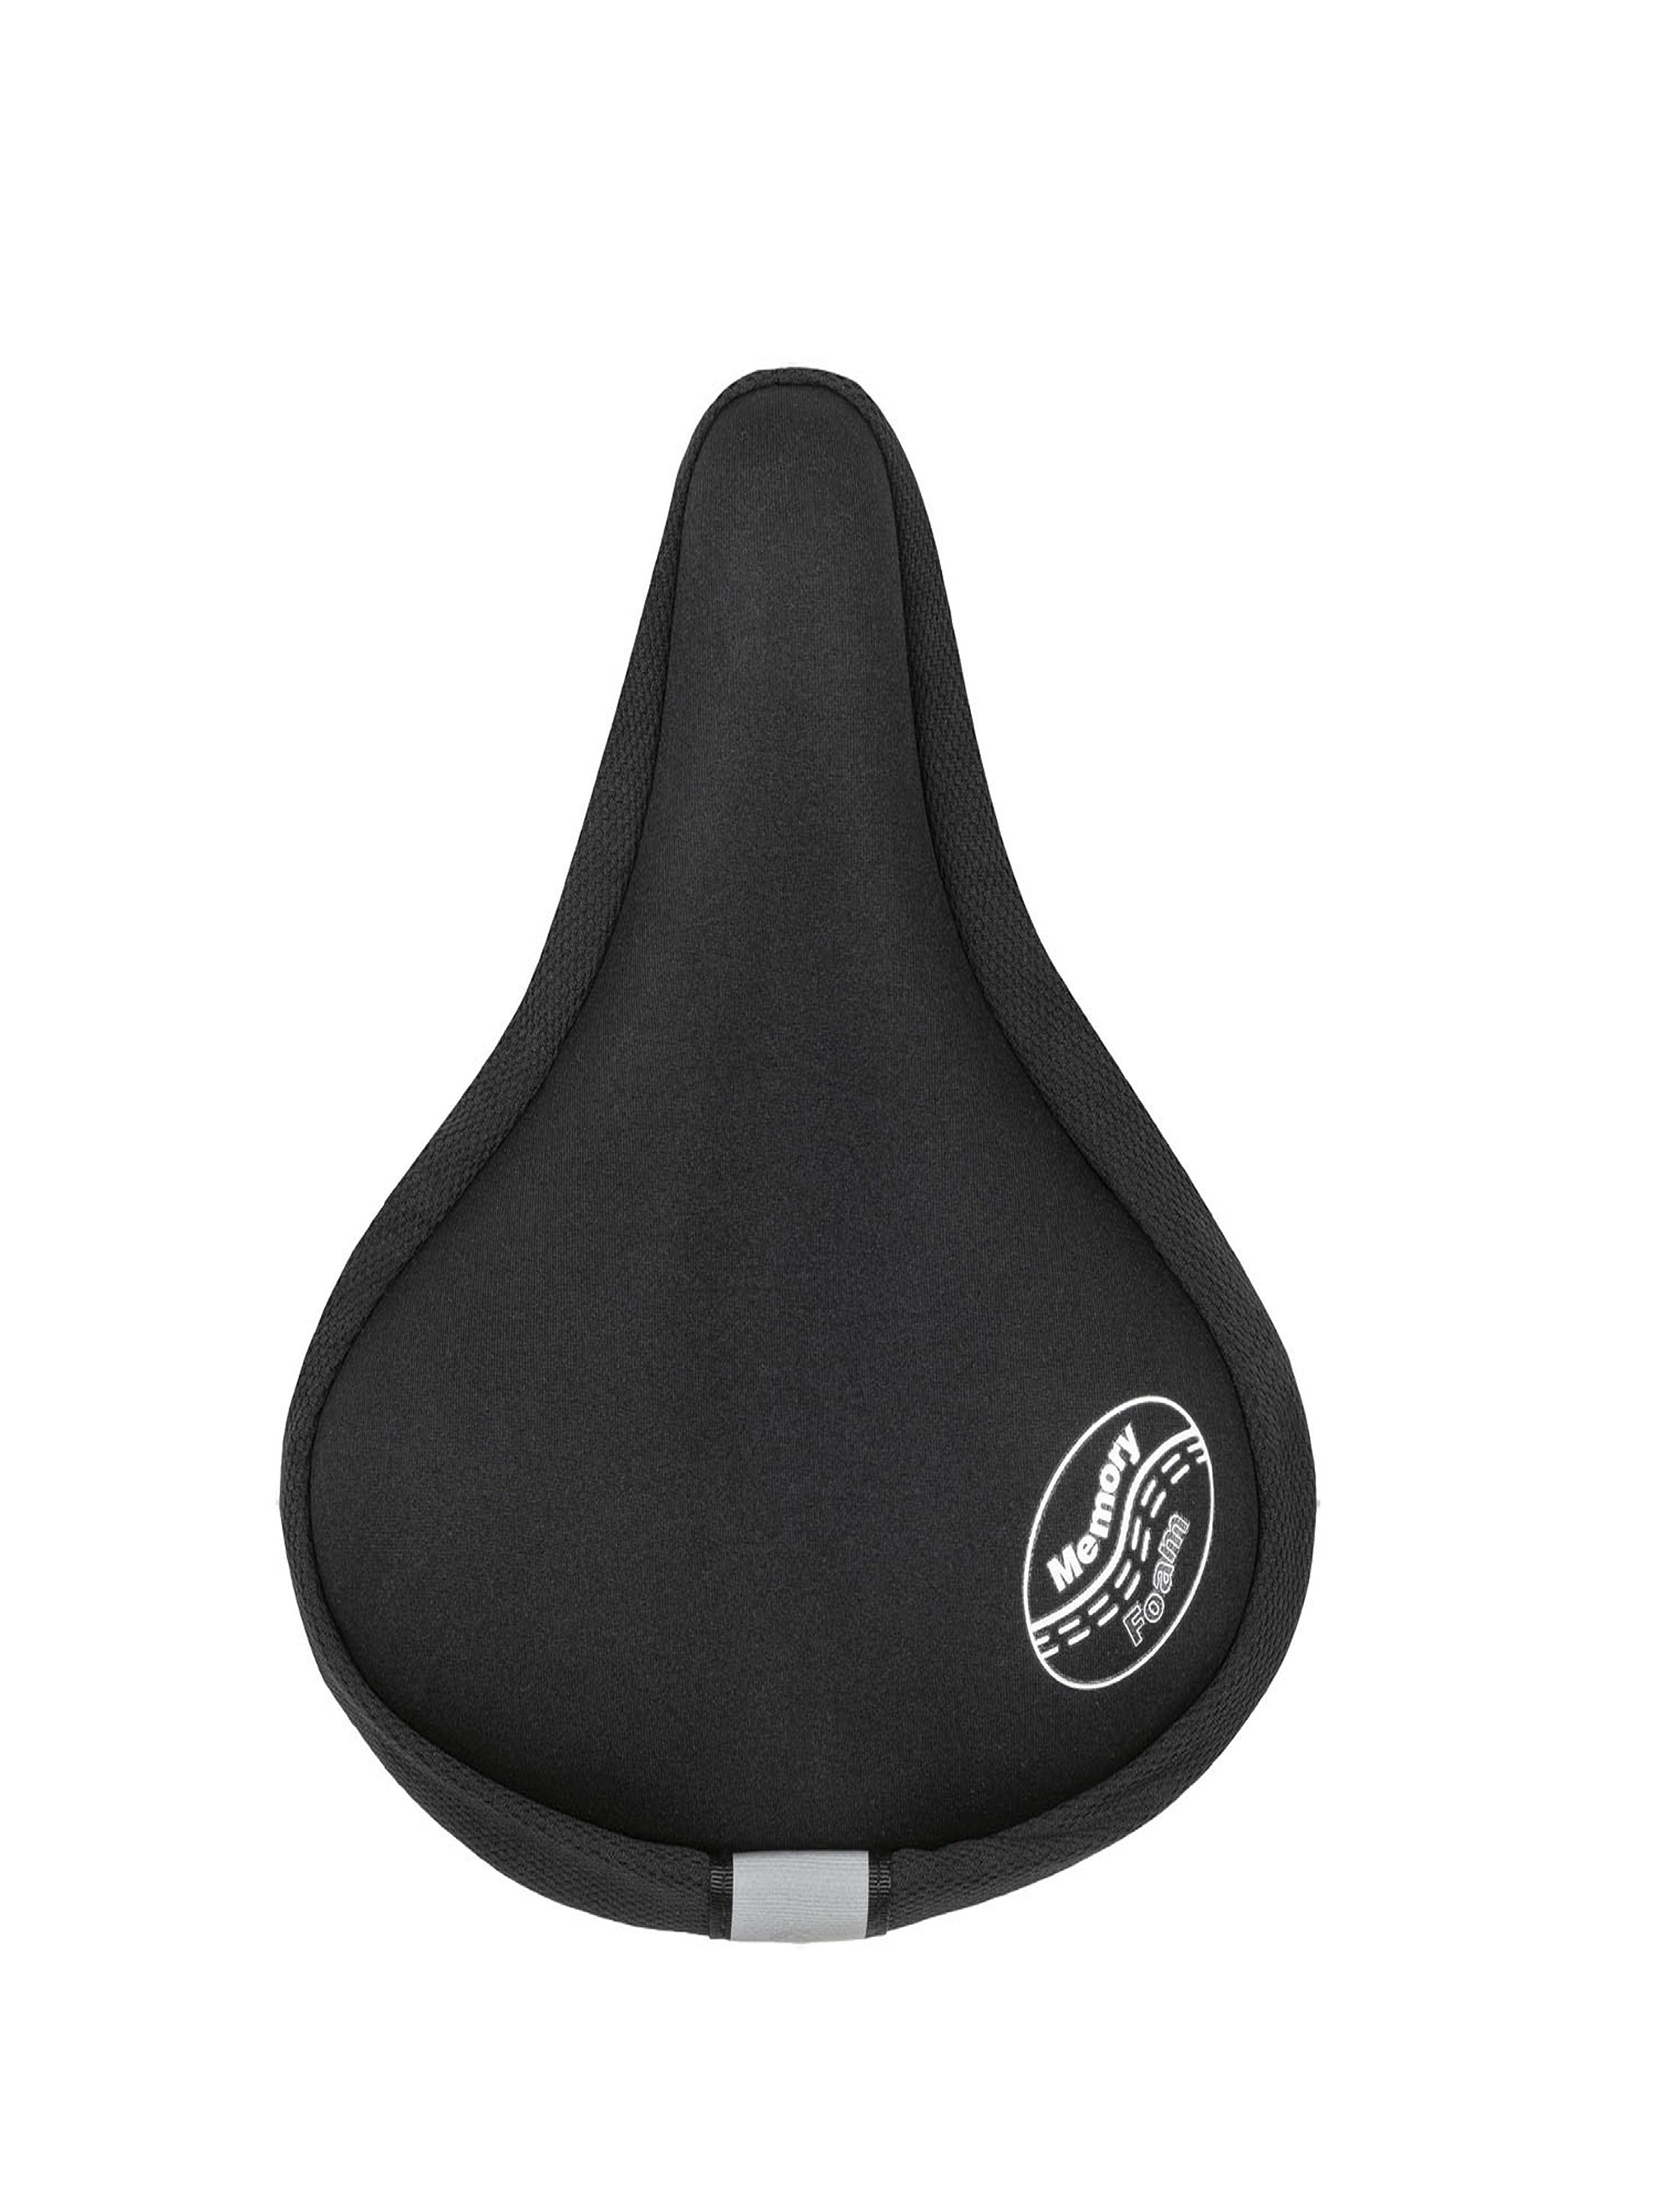 Memory Foam Bicycle Saddle Cover